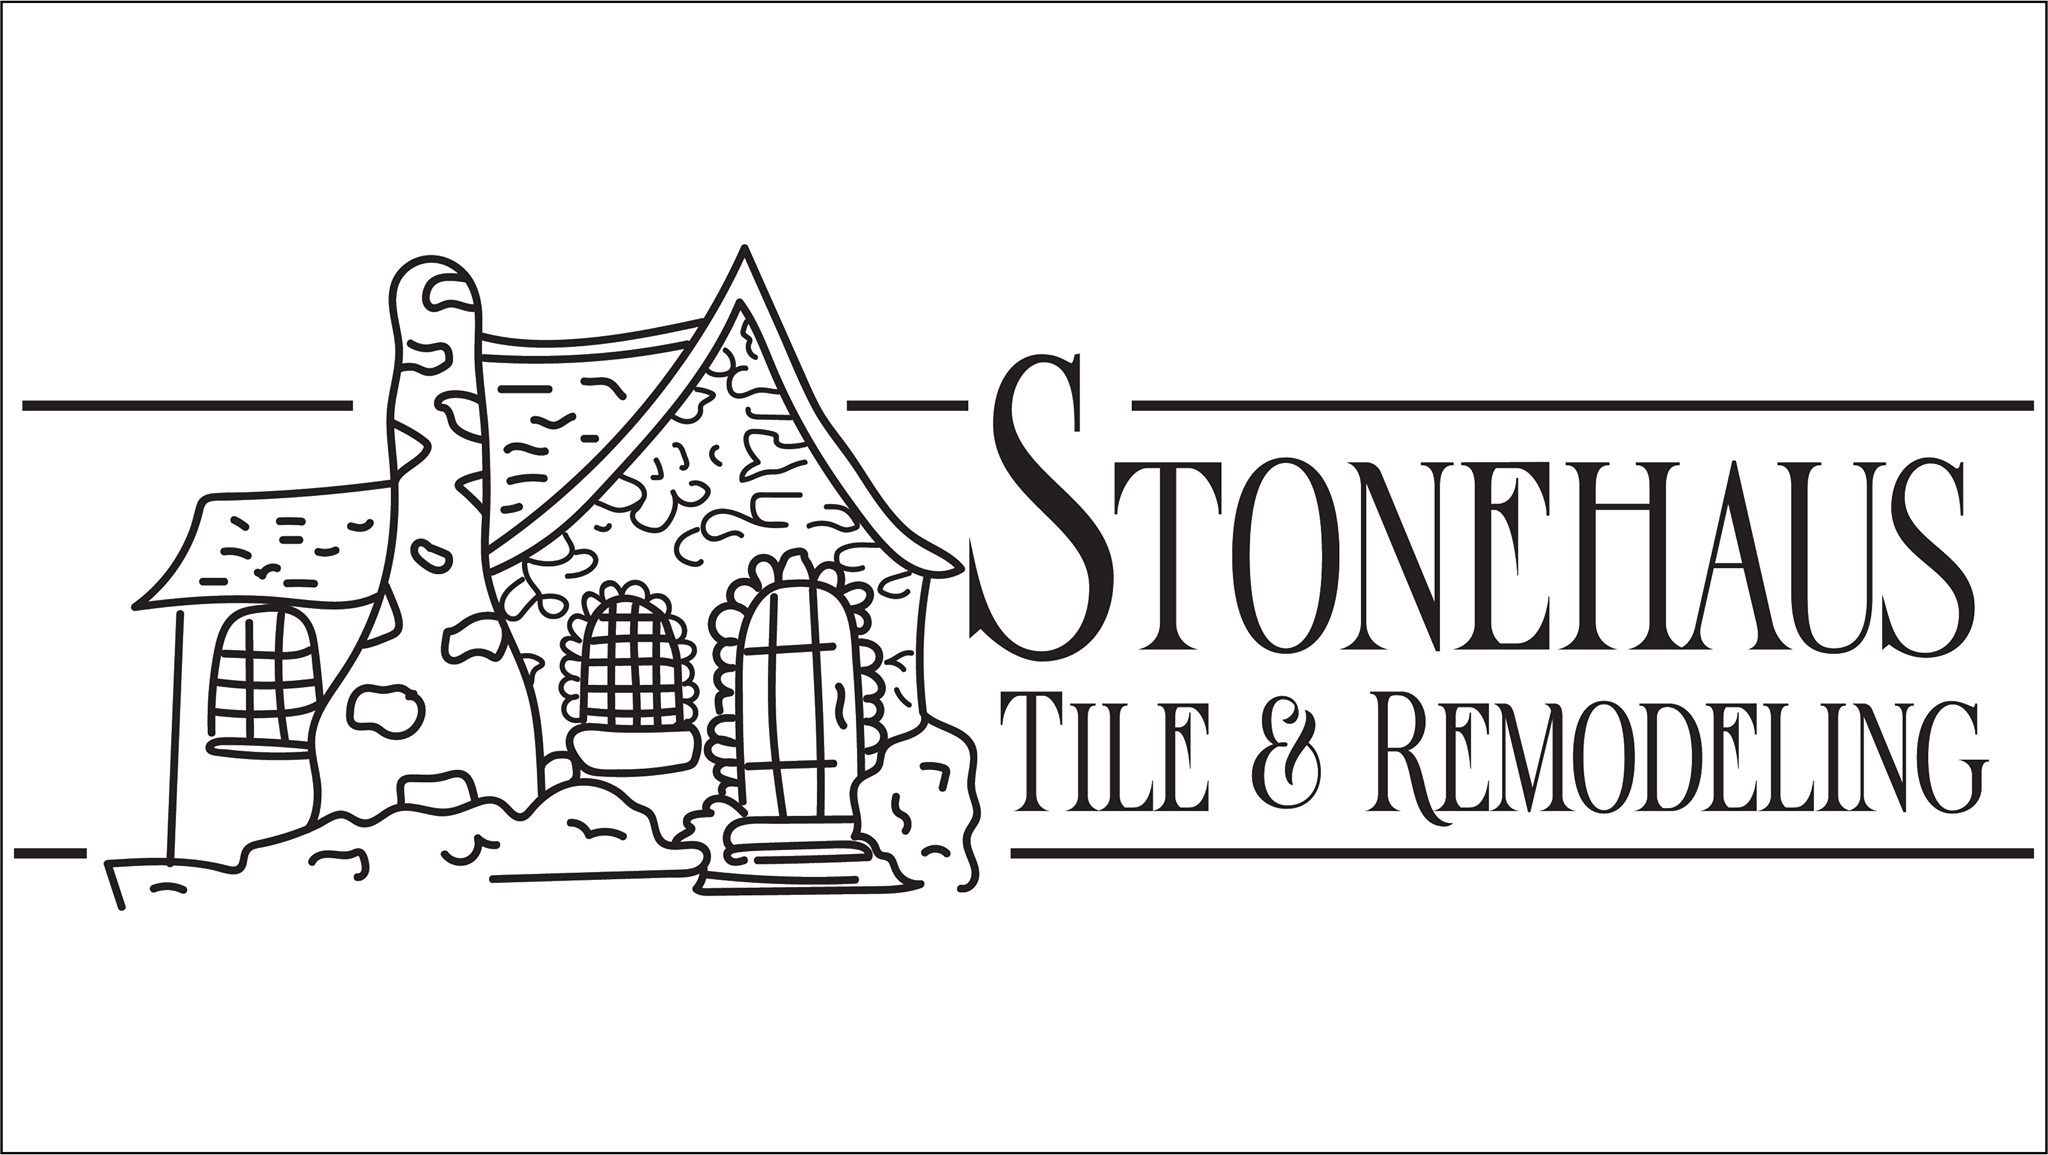 Stonehaus Tile & Remodeling States the Benefits of Professional Bathroom Remodel